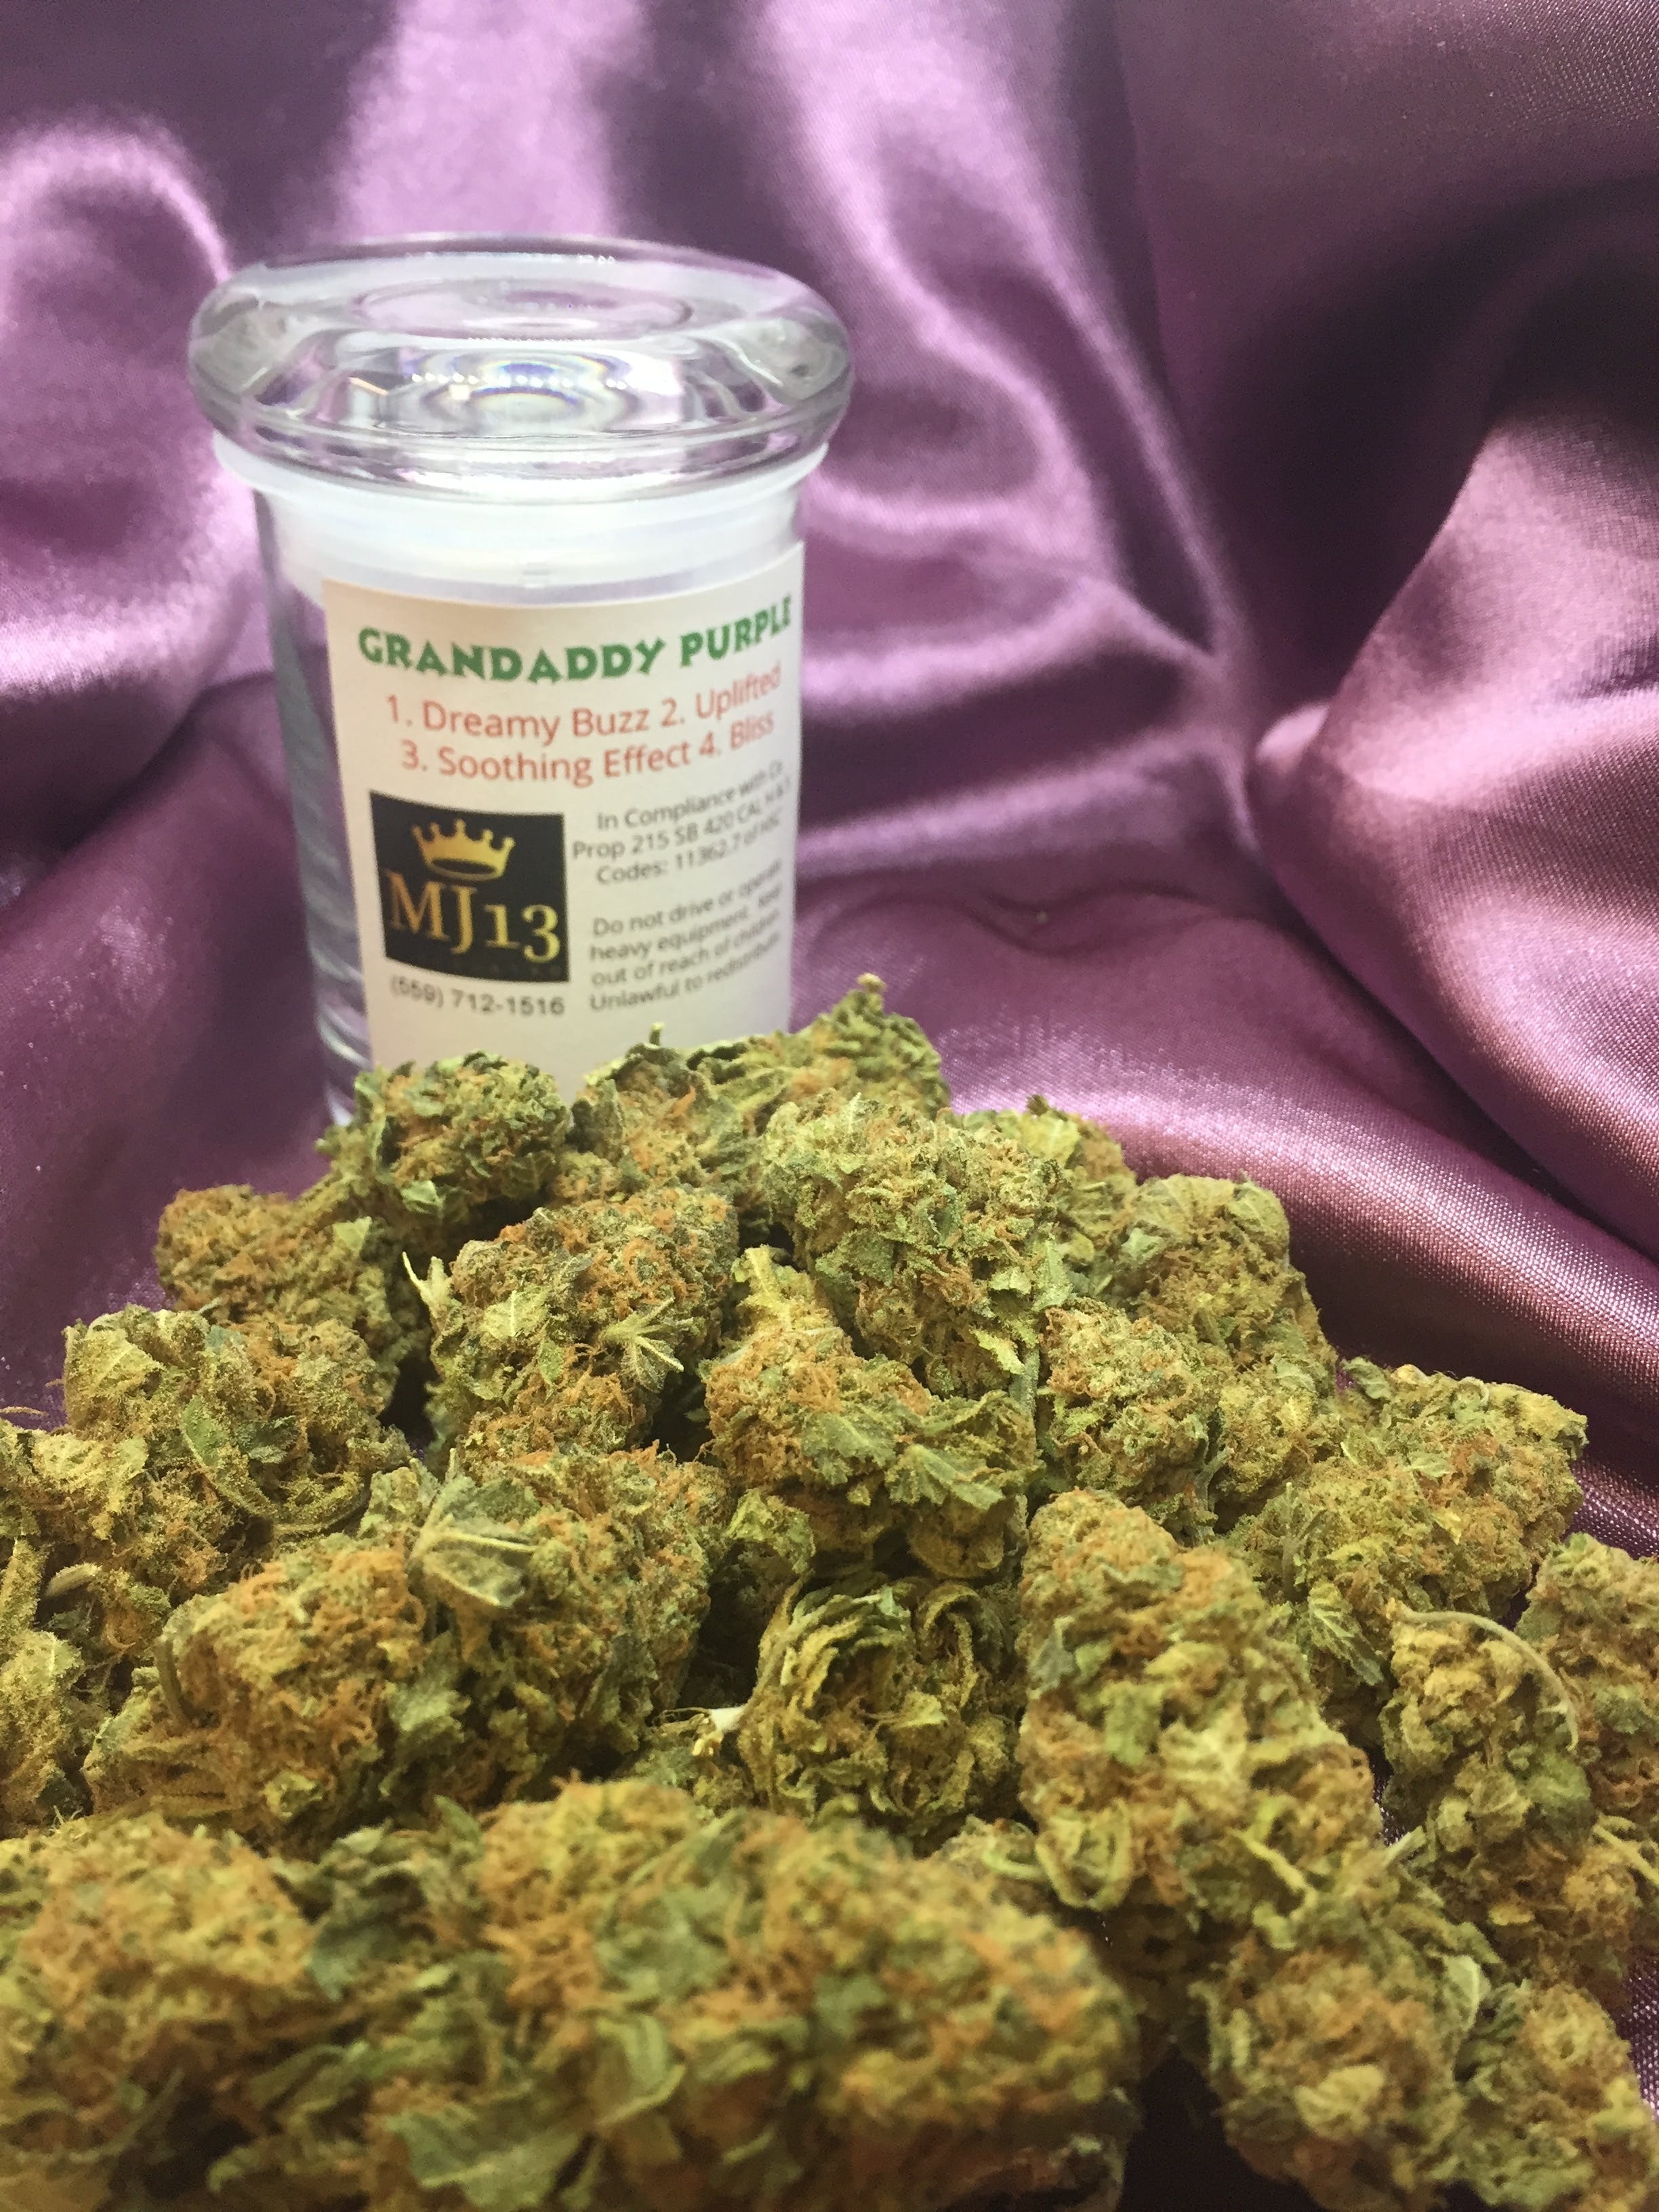 marijuana-dispensaries-please-call-for-appointment-location-fresno-grand-daddy-purple-24110-an-oz-special-21-21-indica-potent-tastes-amazing-21